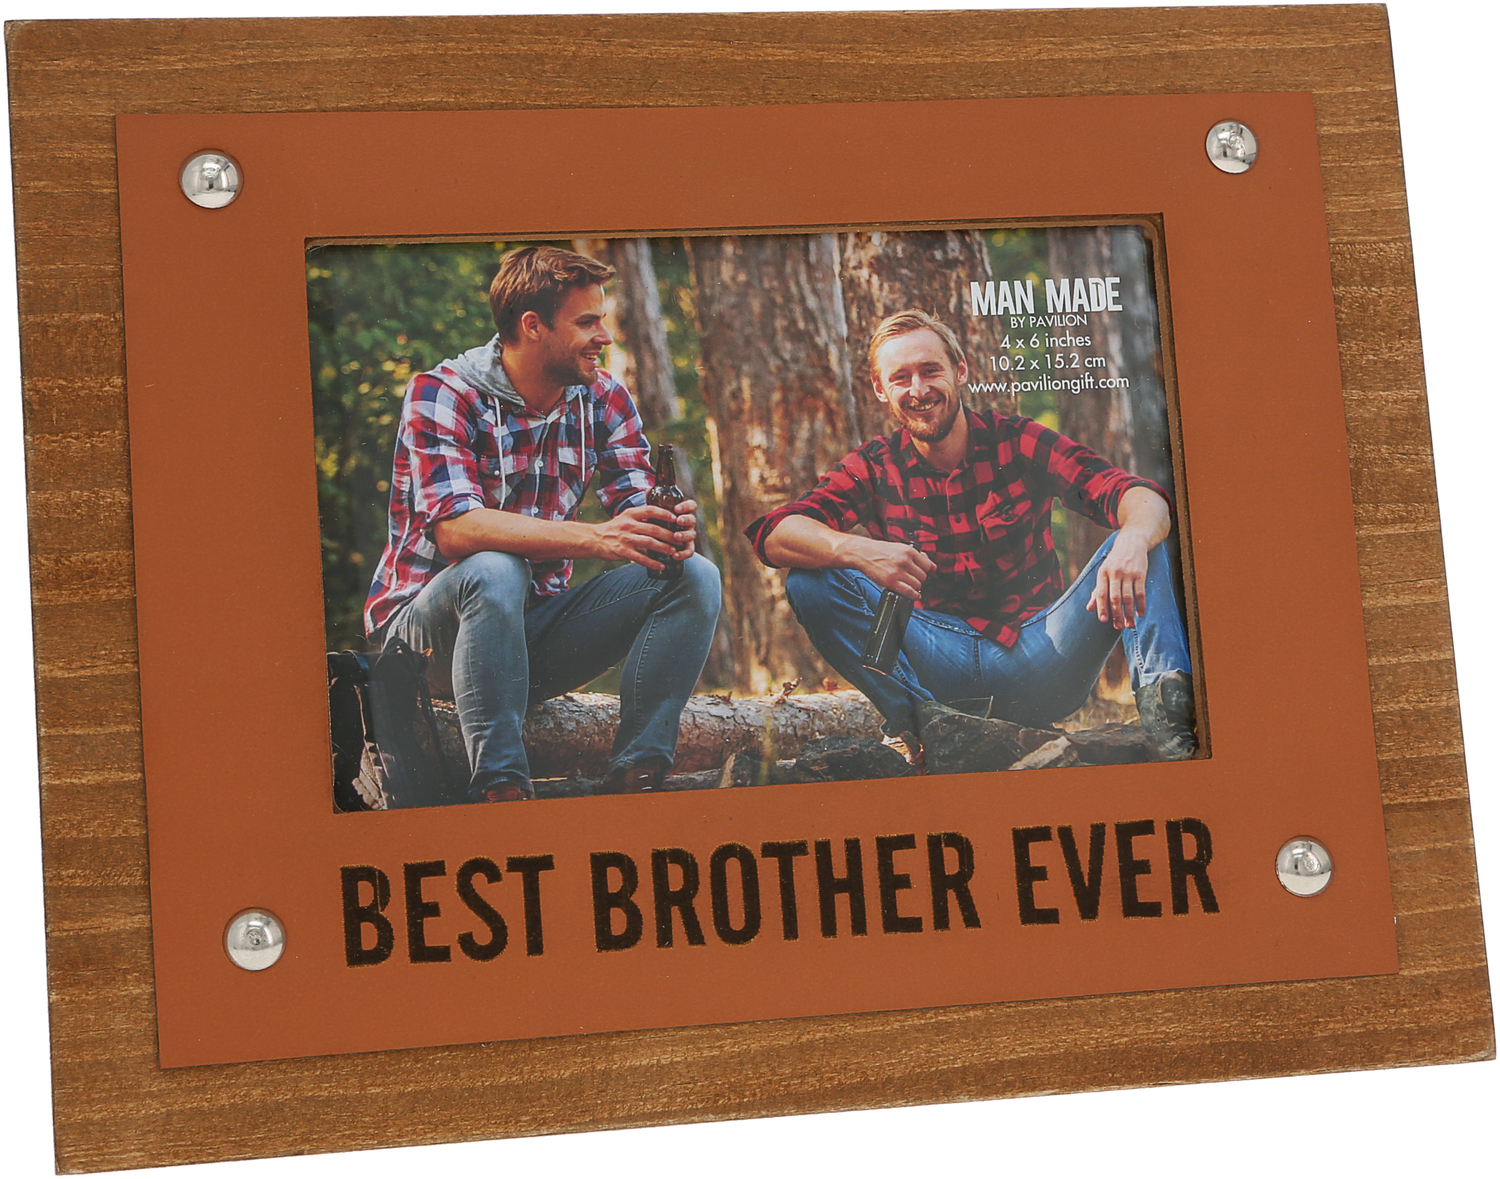 Brother by Man Made - Brother - 9" x 7" Frame
(Holds 6" x 4" Photo)